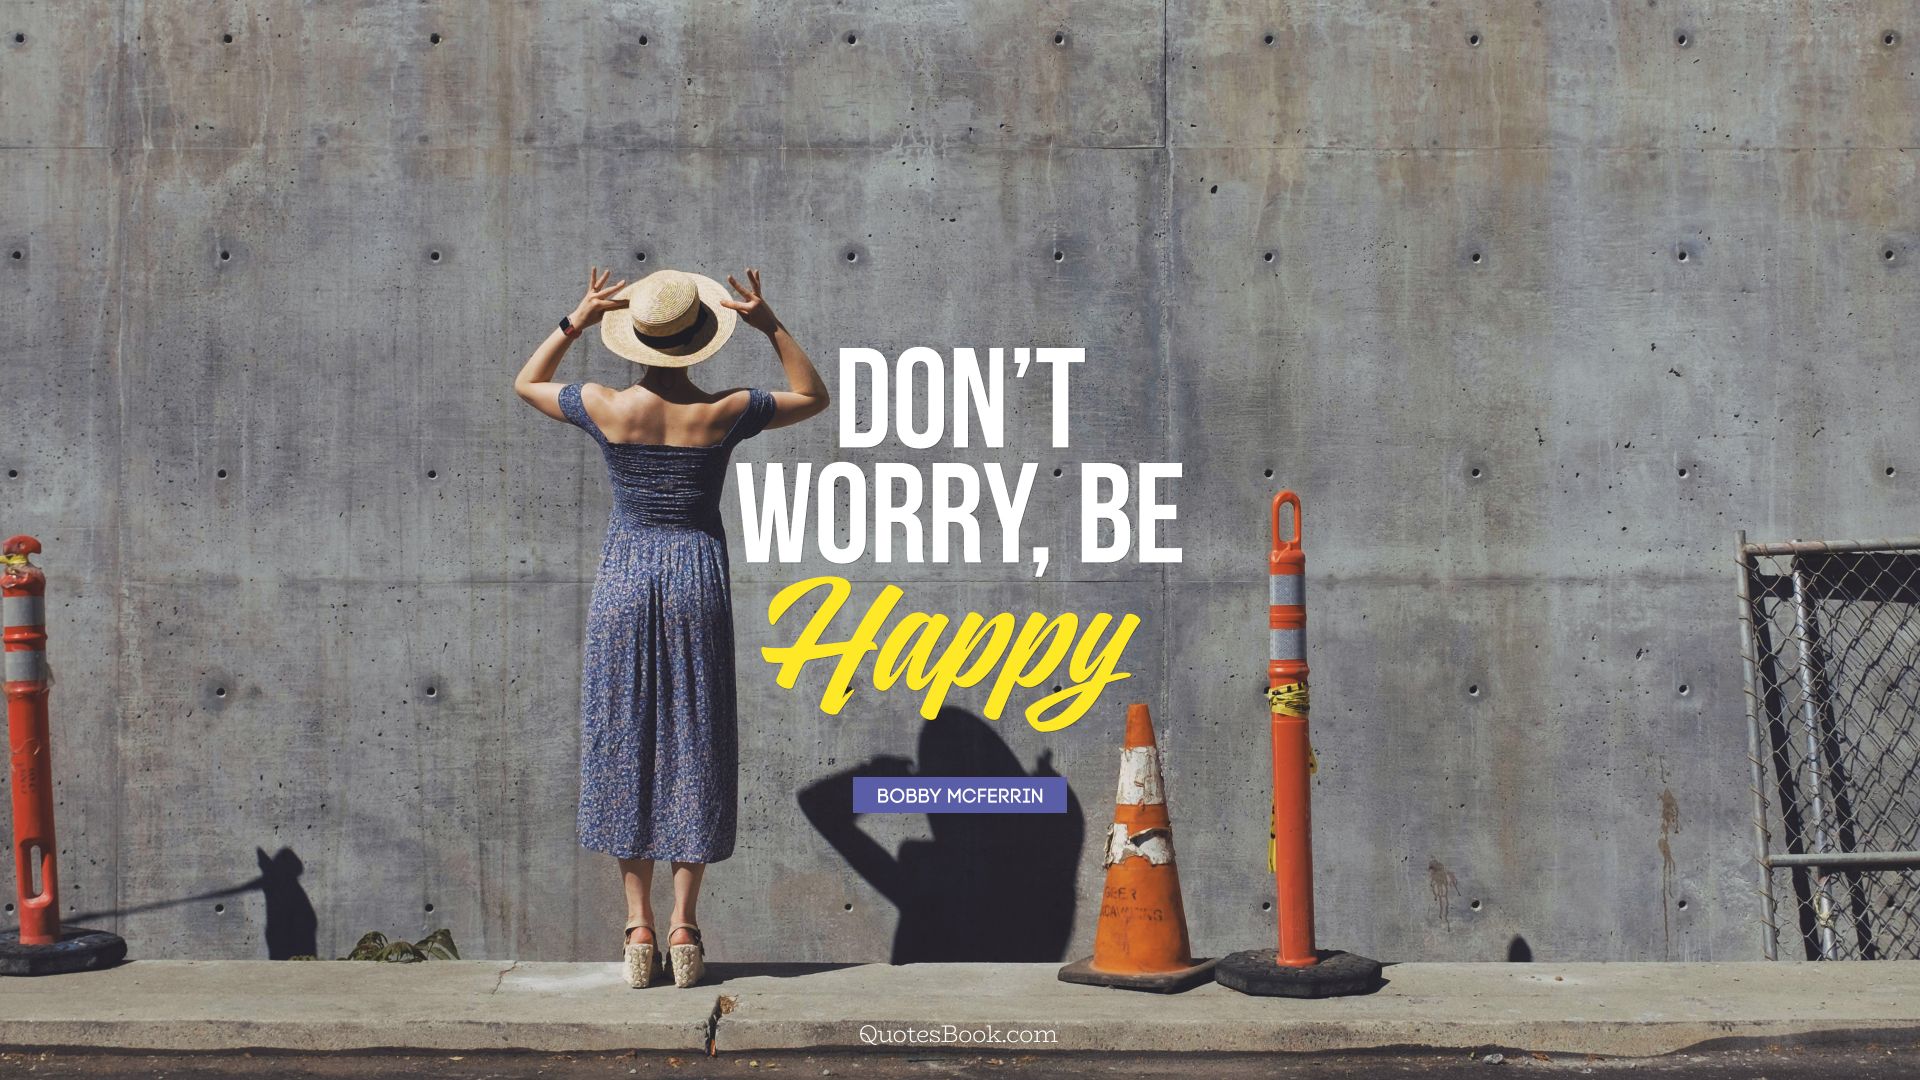 Don't Worry, Be Happy. - Quote by Bobby McFerrin